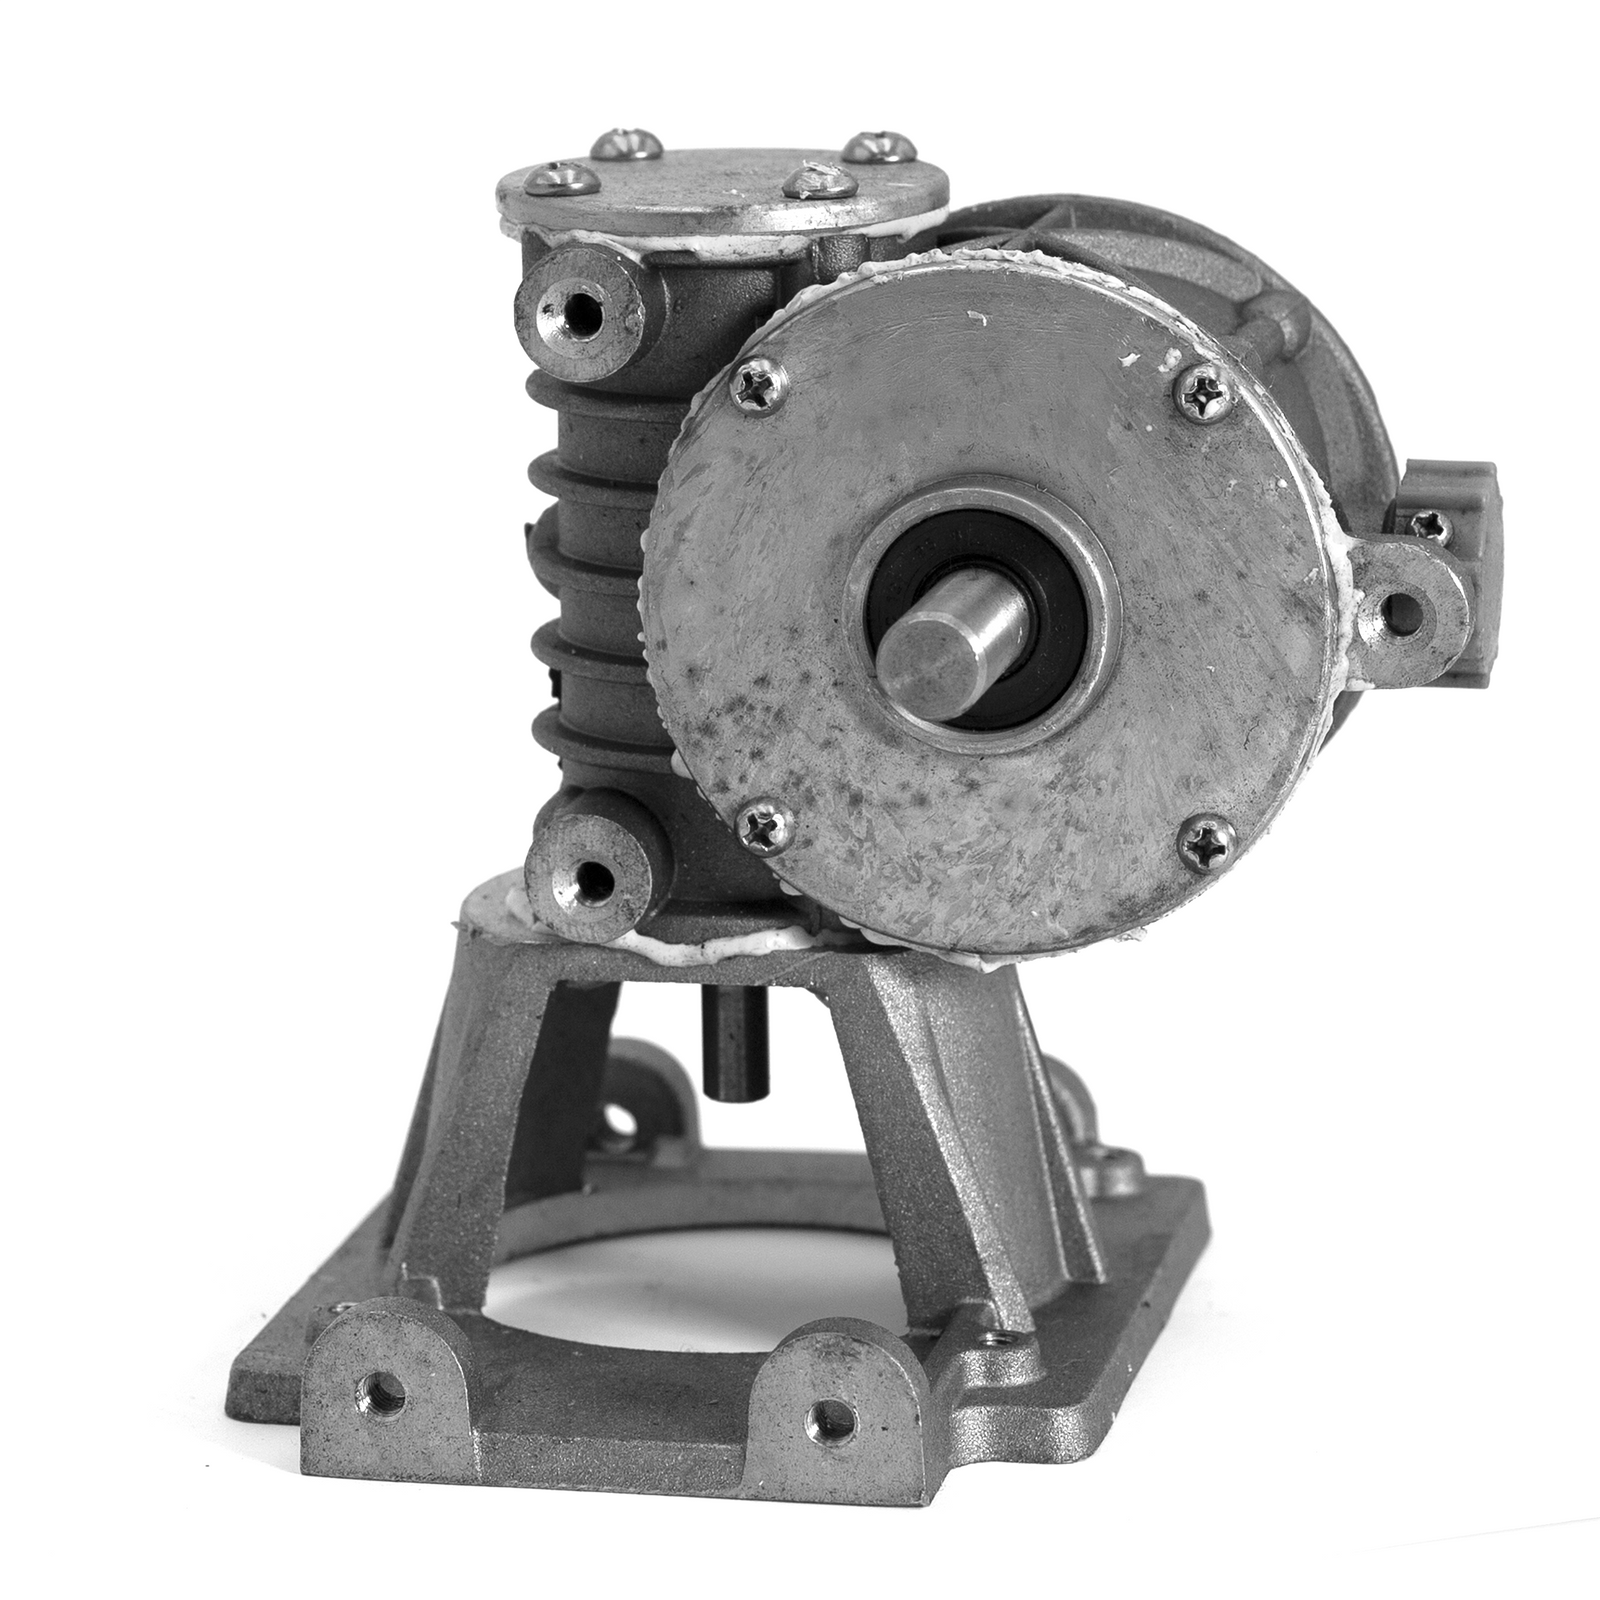 a metal transmission assembly for JORES TECHNOLOGIES® continuous band sealers